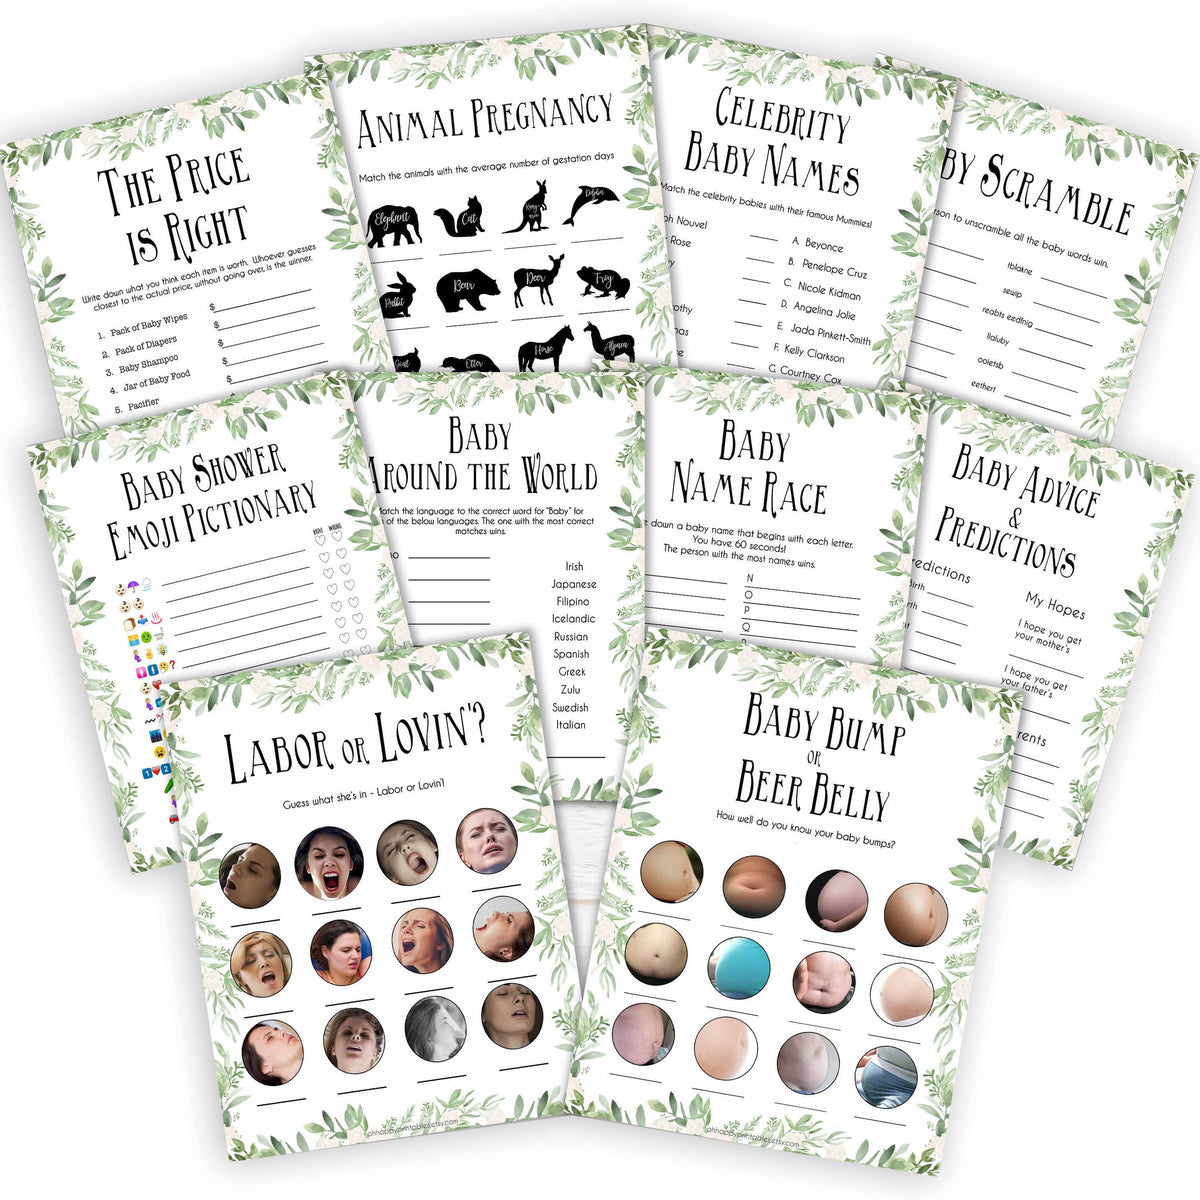 Greenery 10 Baby Shower Games, Printable Baby Shower Games, Baby Shower Games Pack, Green Baby Games, Baby Shower Pack, Baby Shower, printable baby shower games, fun baby shower games, popular baby shower games